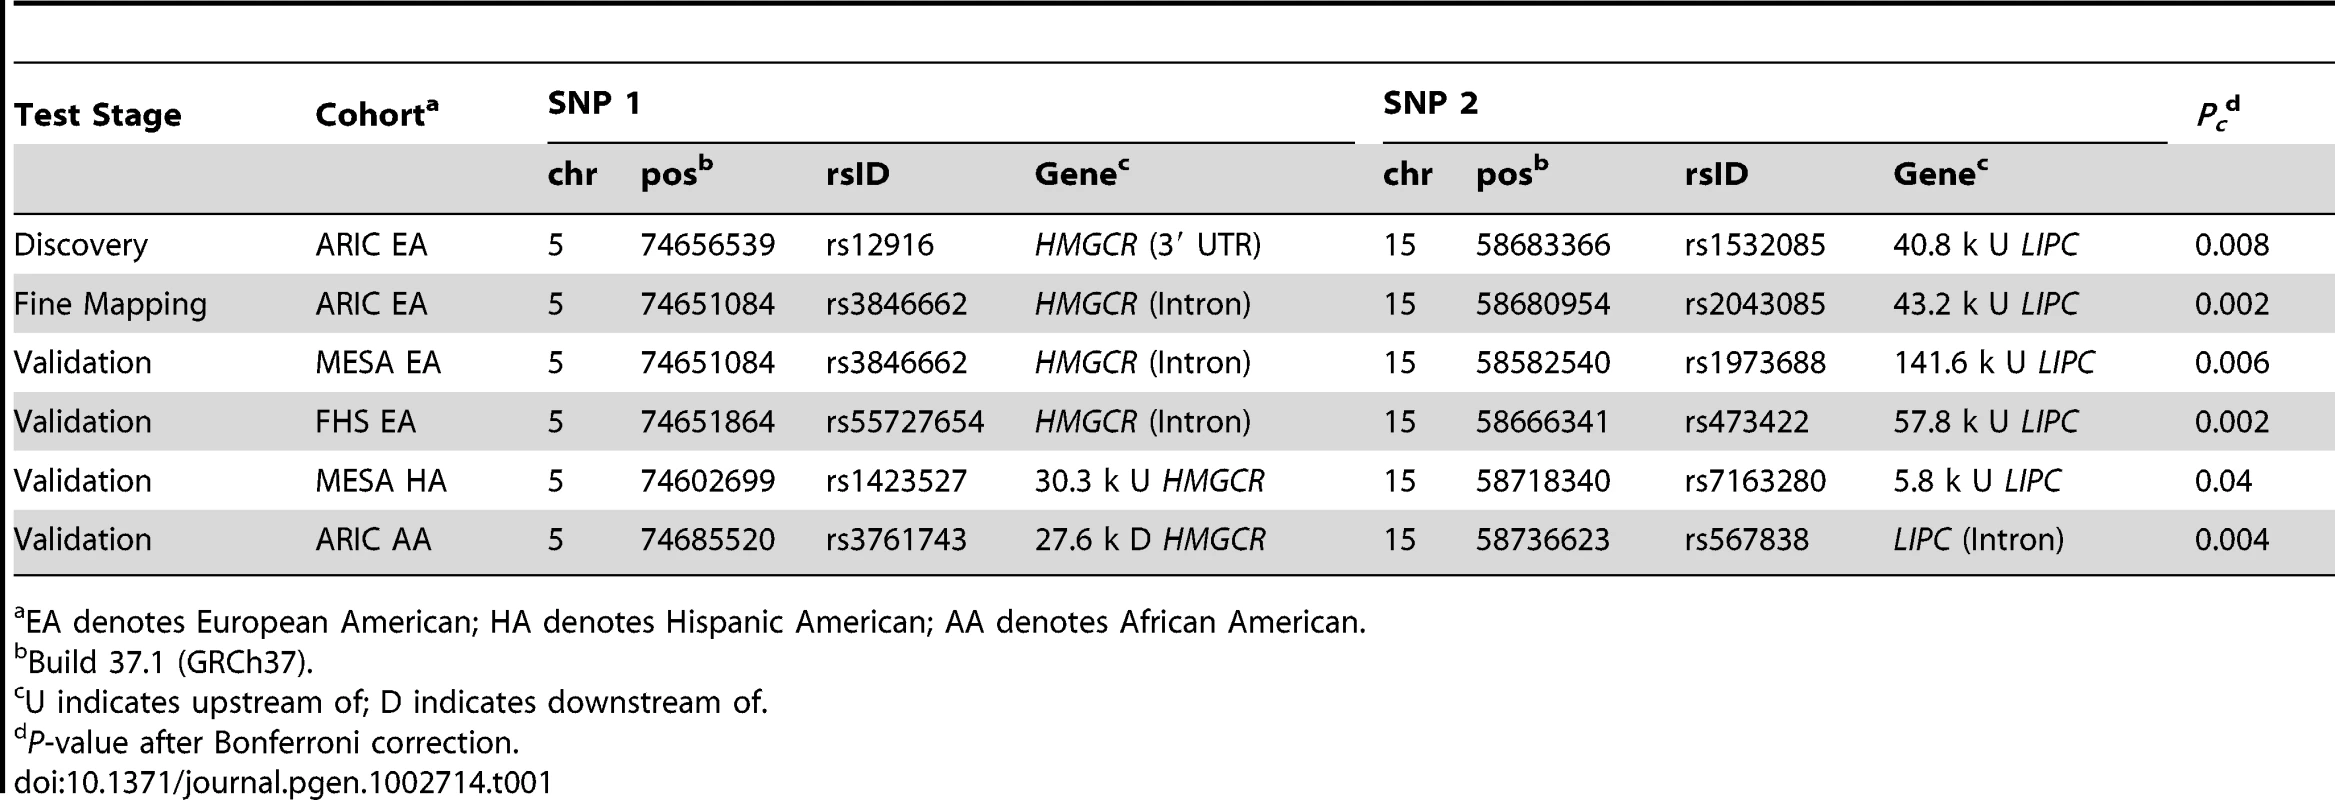 Significant interactions on HDL-C in multi-ethnic cohorts.